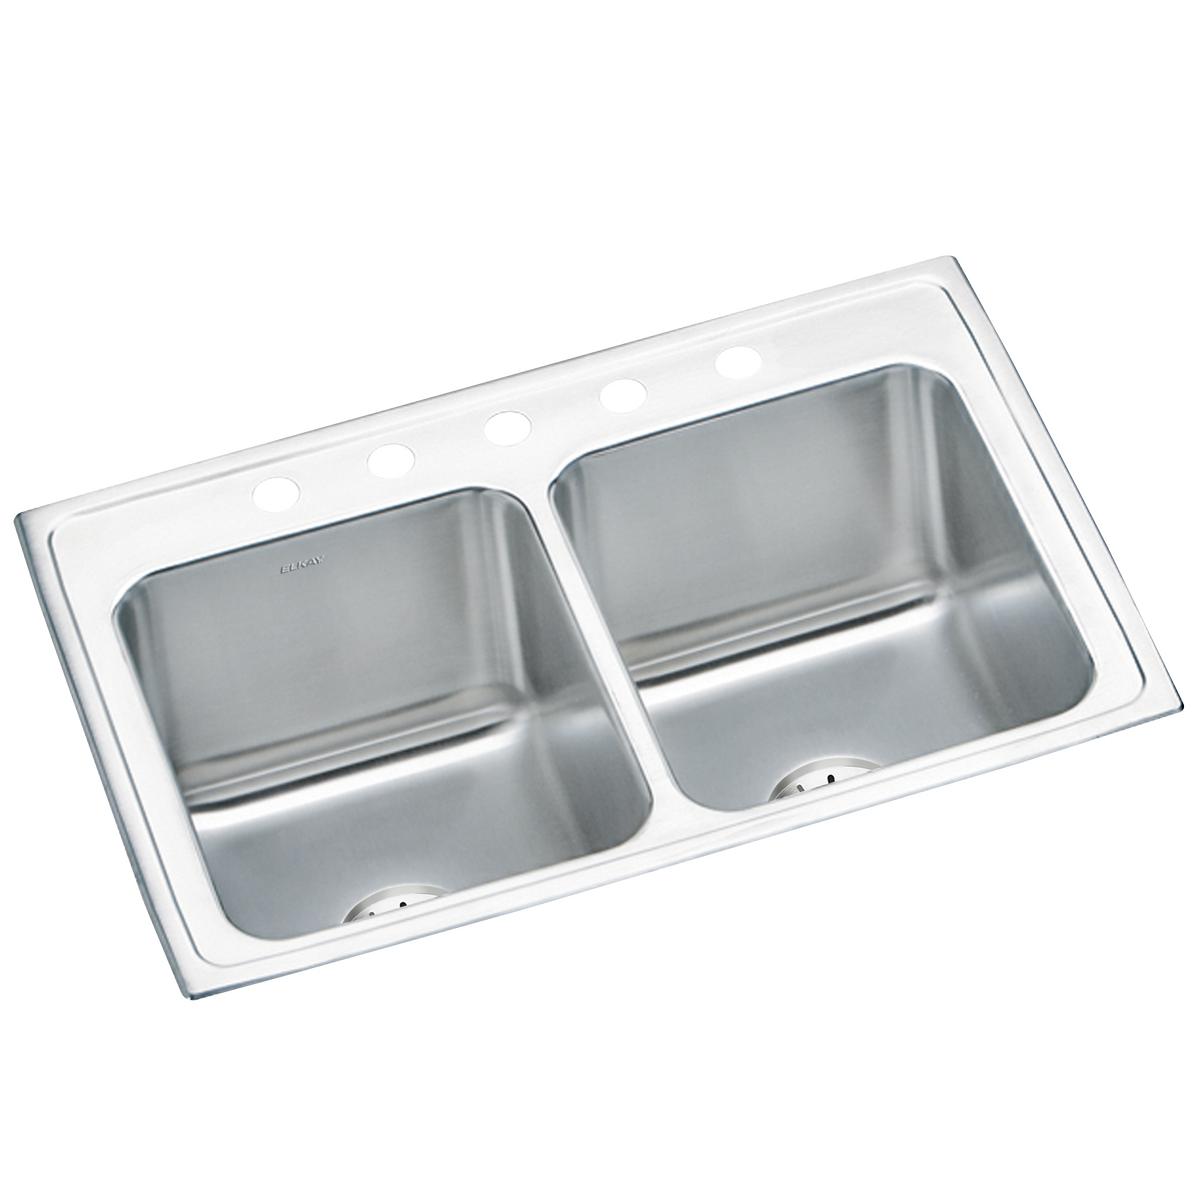 Elkay Lustertone Classic 33" x 22" x 10-1/8" Equal Double Bowl Drop-in Sink with Perfect Drain